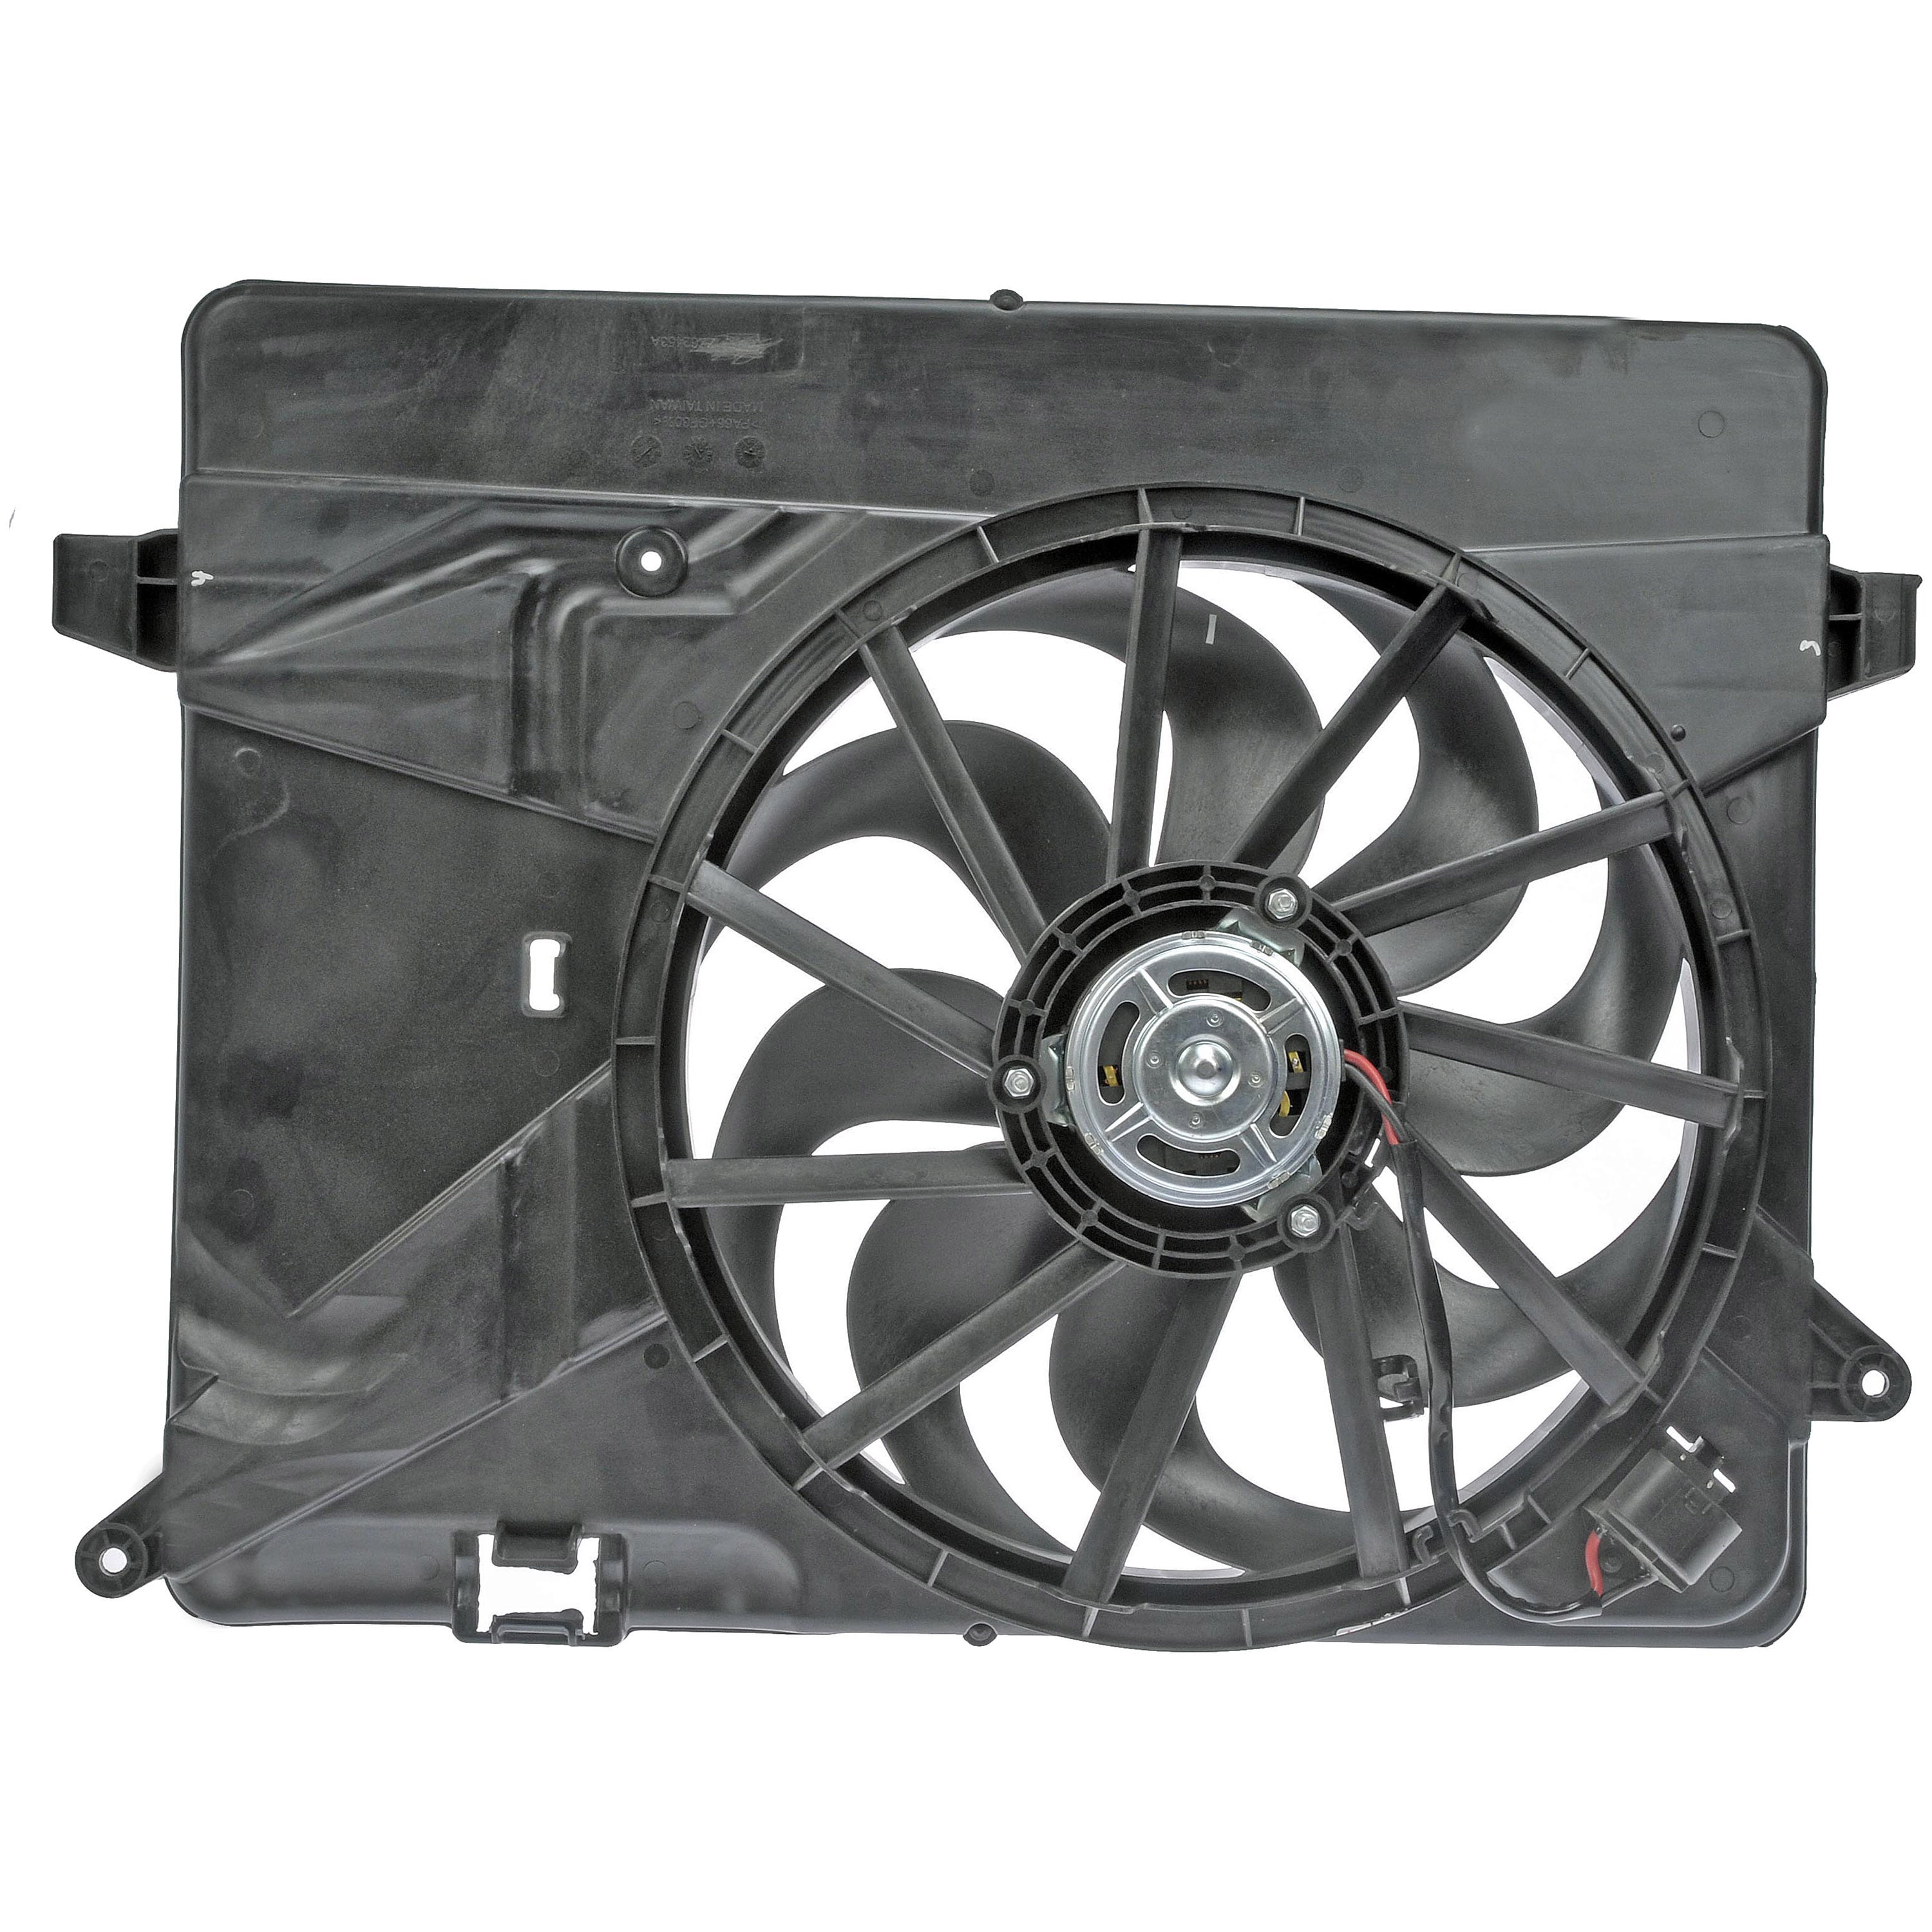 Derale 16817 Radiator Fan with Aluminum Shroud Assembly 